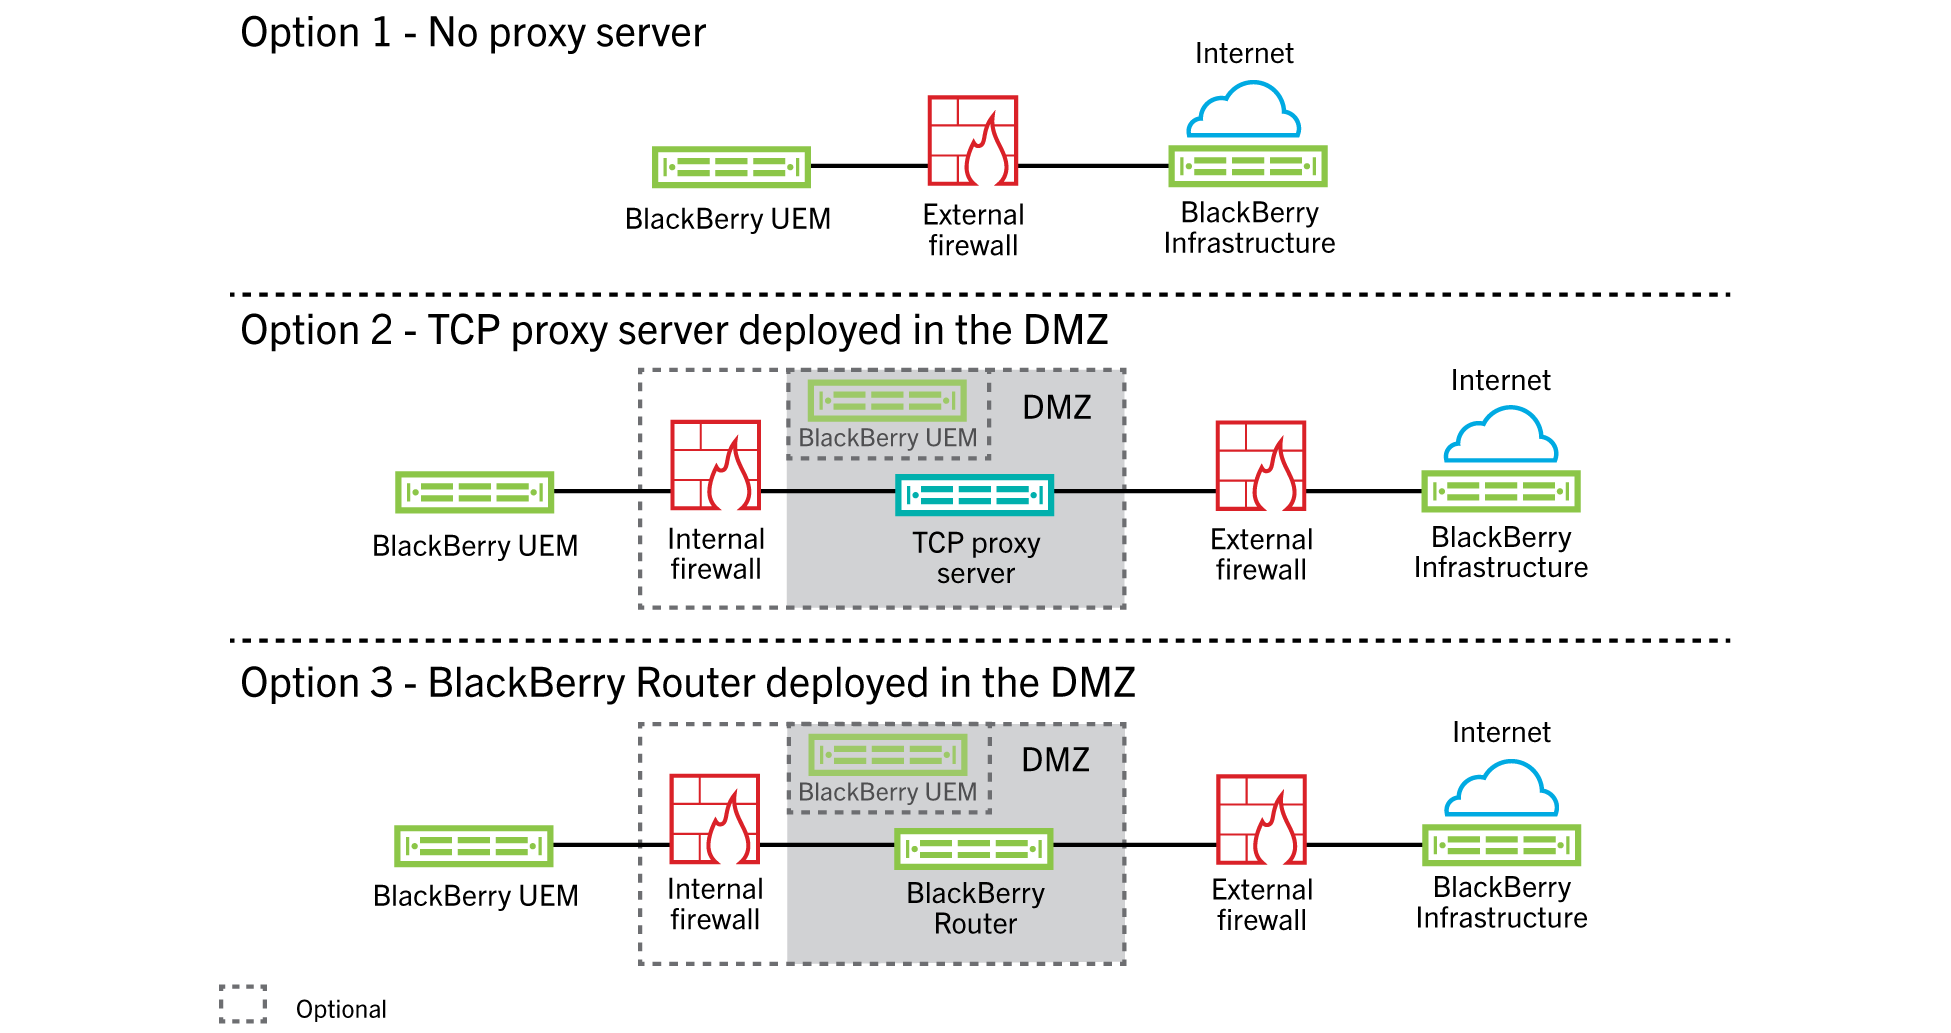 Image showing BlackBerry UEM configured to use no proxy server, a TCP proxy server deployed in the DMZ, and a BlackBerry Router deployed in a DMZ.